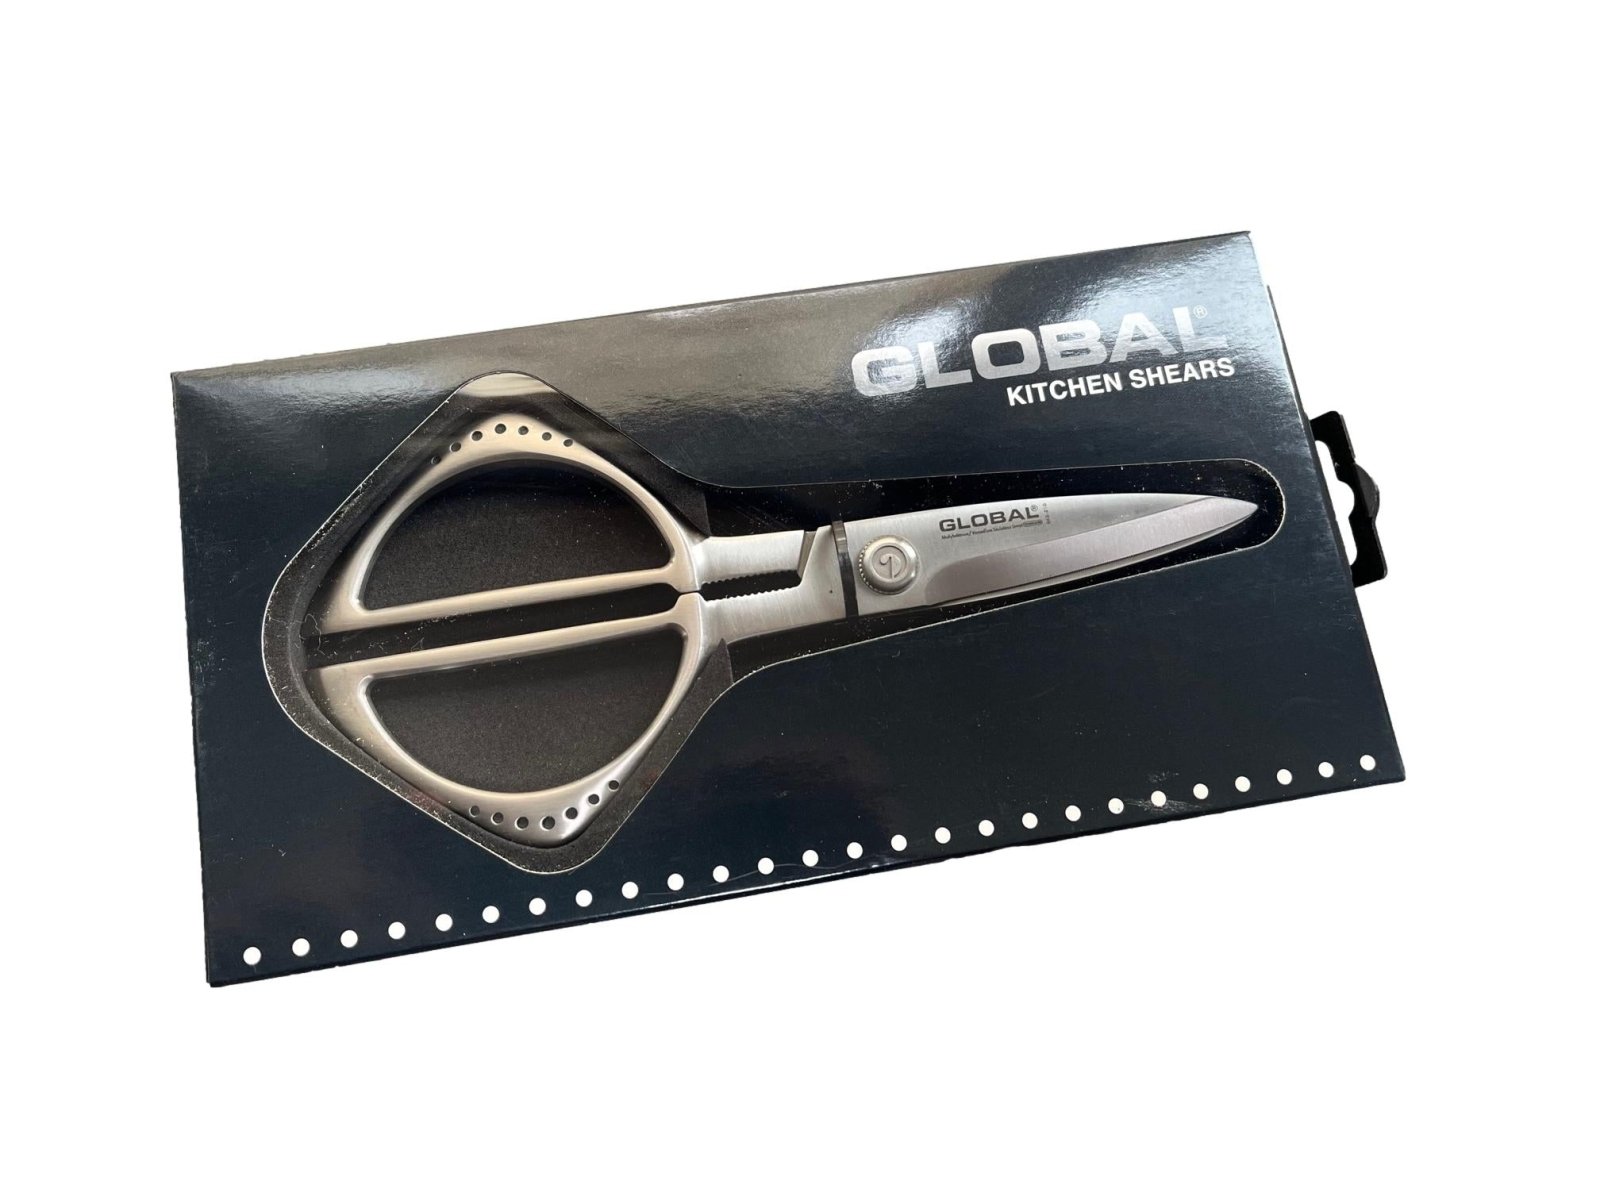 Global Kitchen Shears - GKS-210 - The Cotswold Knife Company